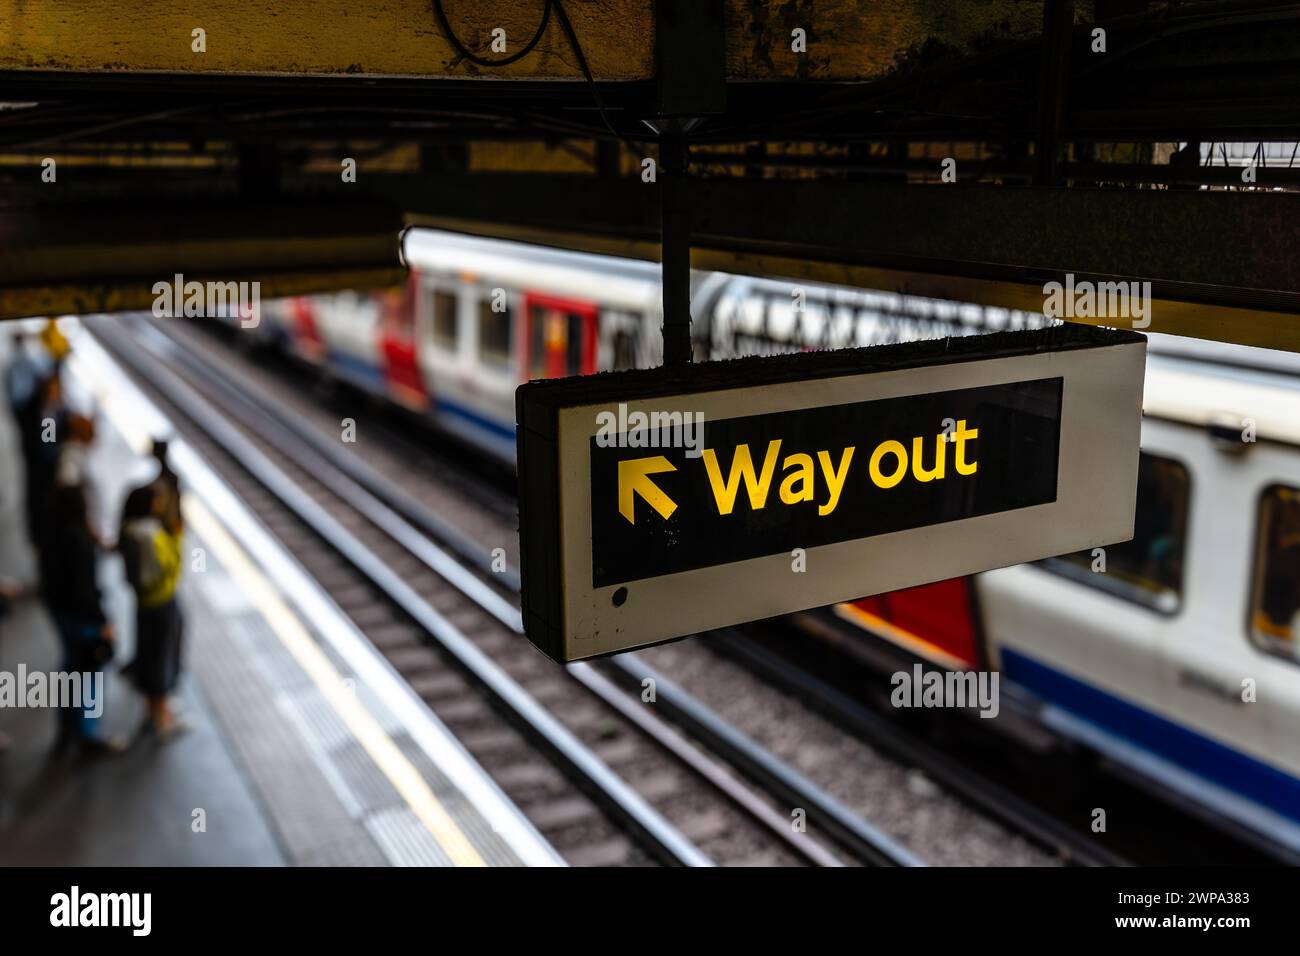 Way out signal in the subway against blurred background Stock Photo